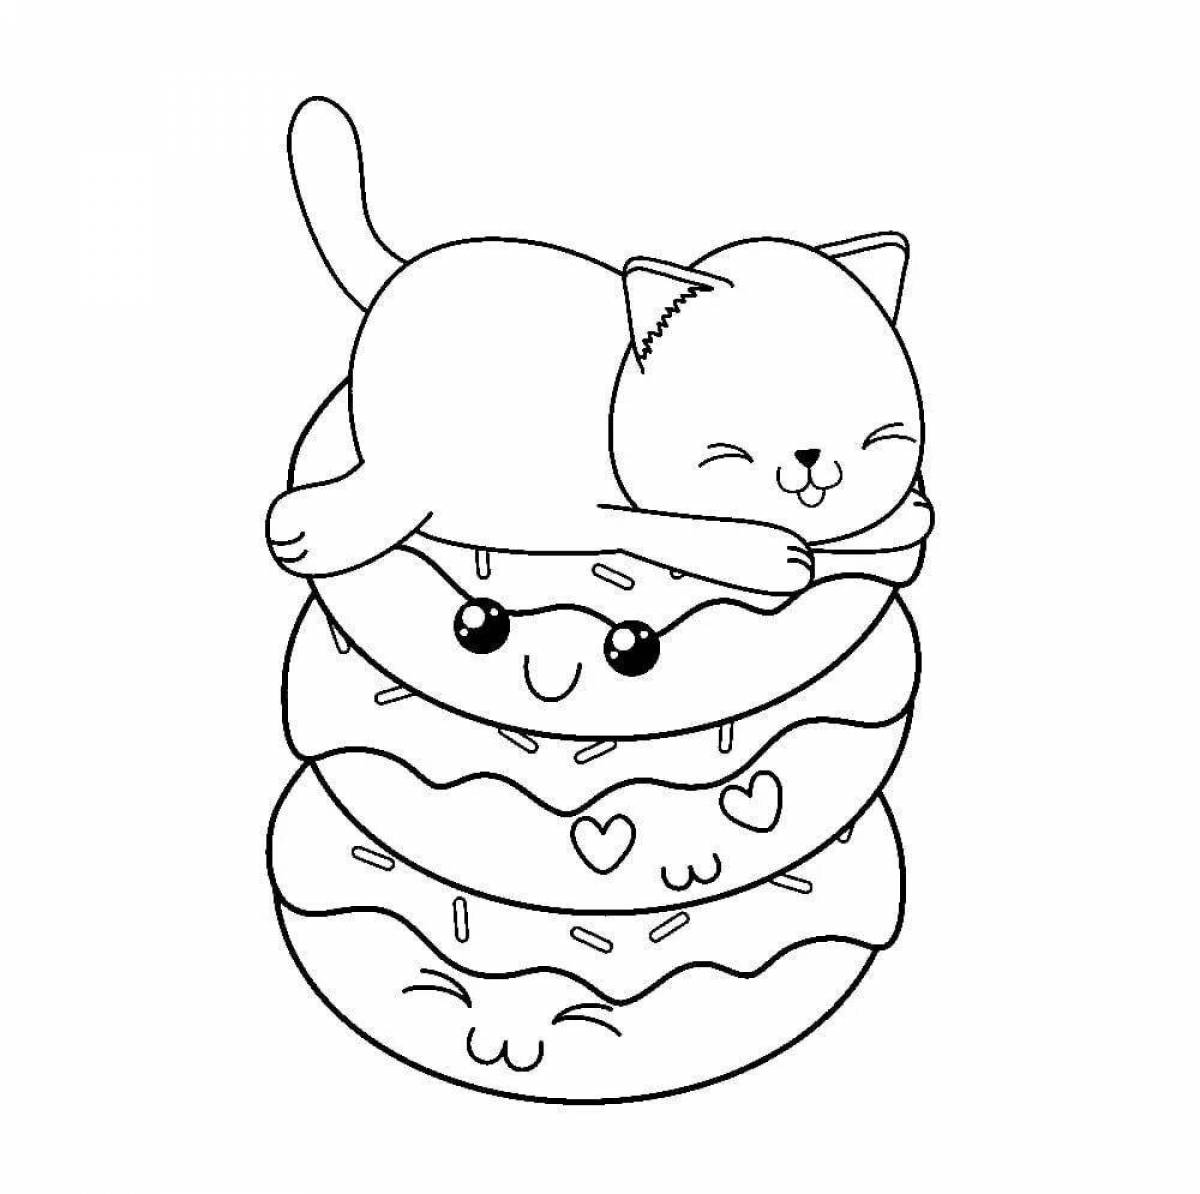 Fabulous donut cat coloring page